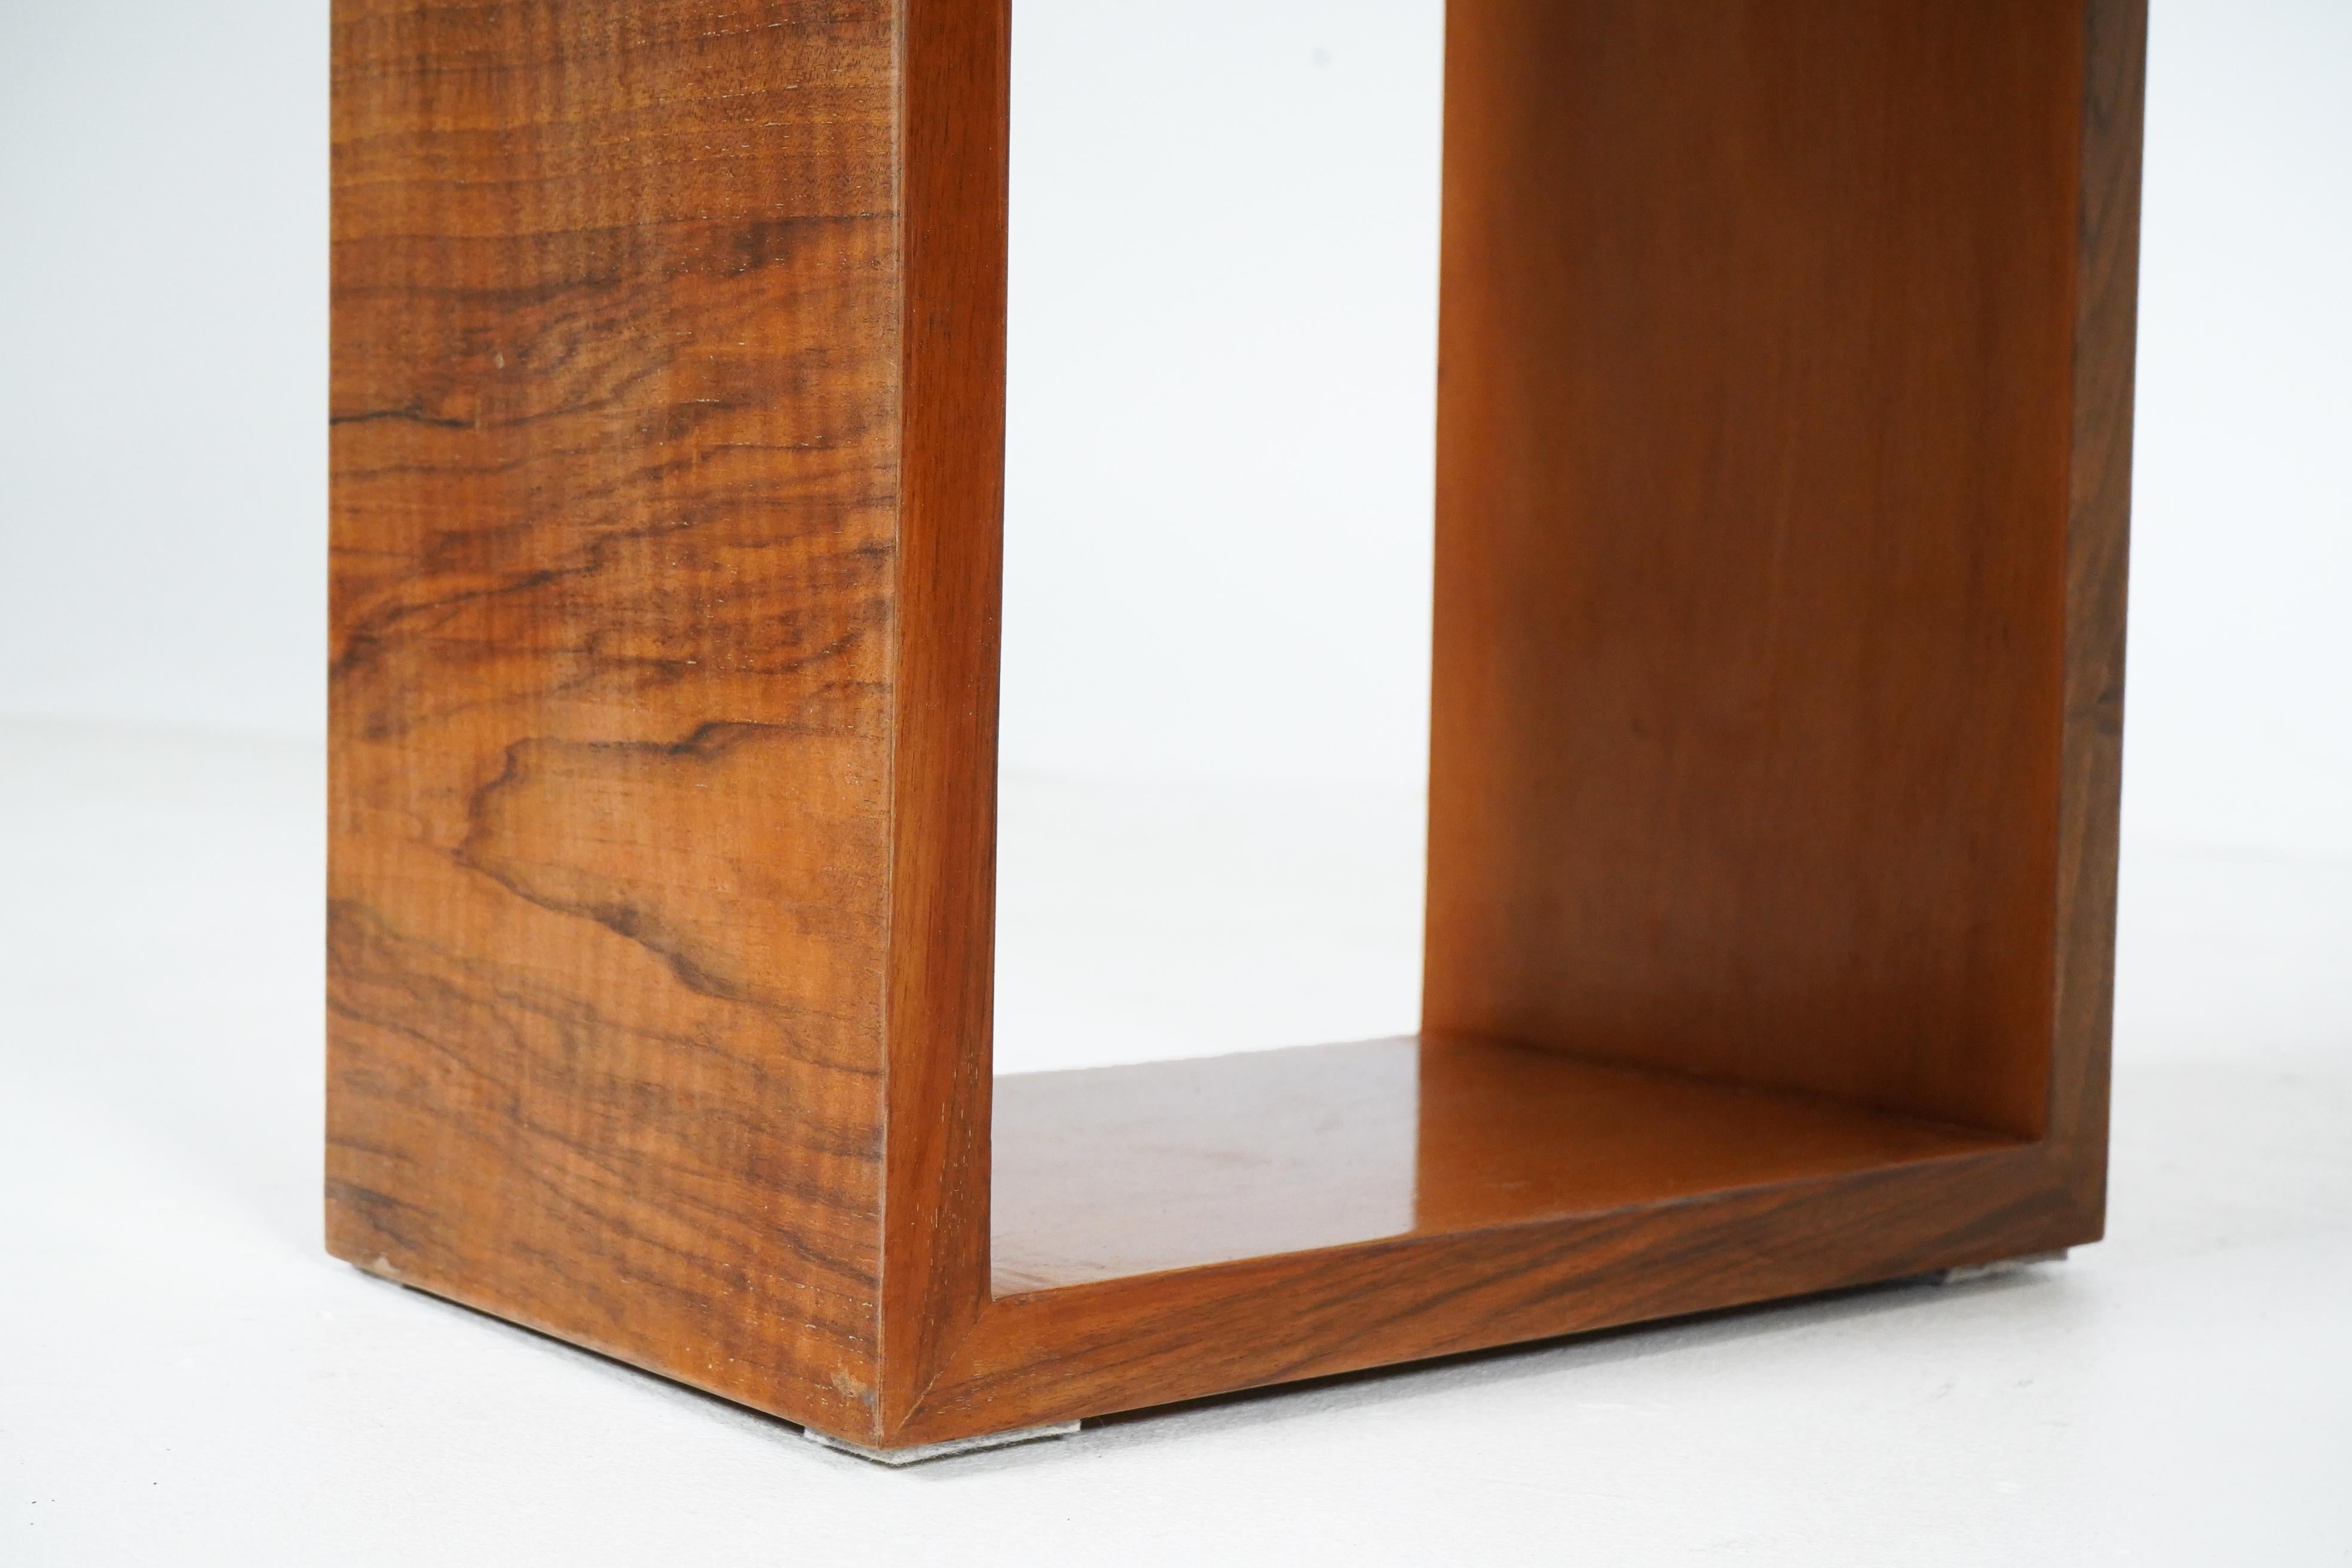 This dramatic 1960s console features walnut veneer and a cantilevered form. During the 1960s and 1970s, Hungarian furniture makers were encouraged to create simple, modern designs that could be mass-produced. They were intended to compete with